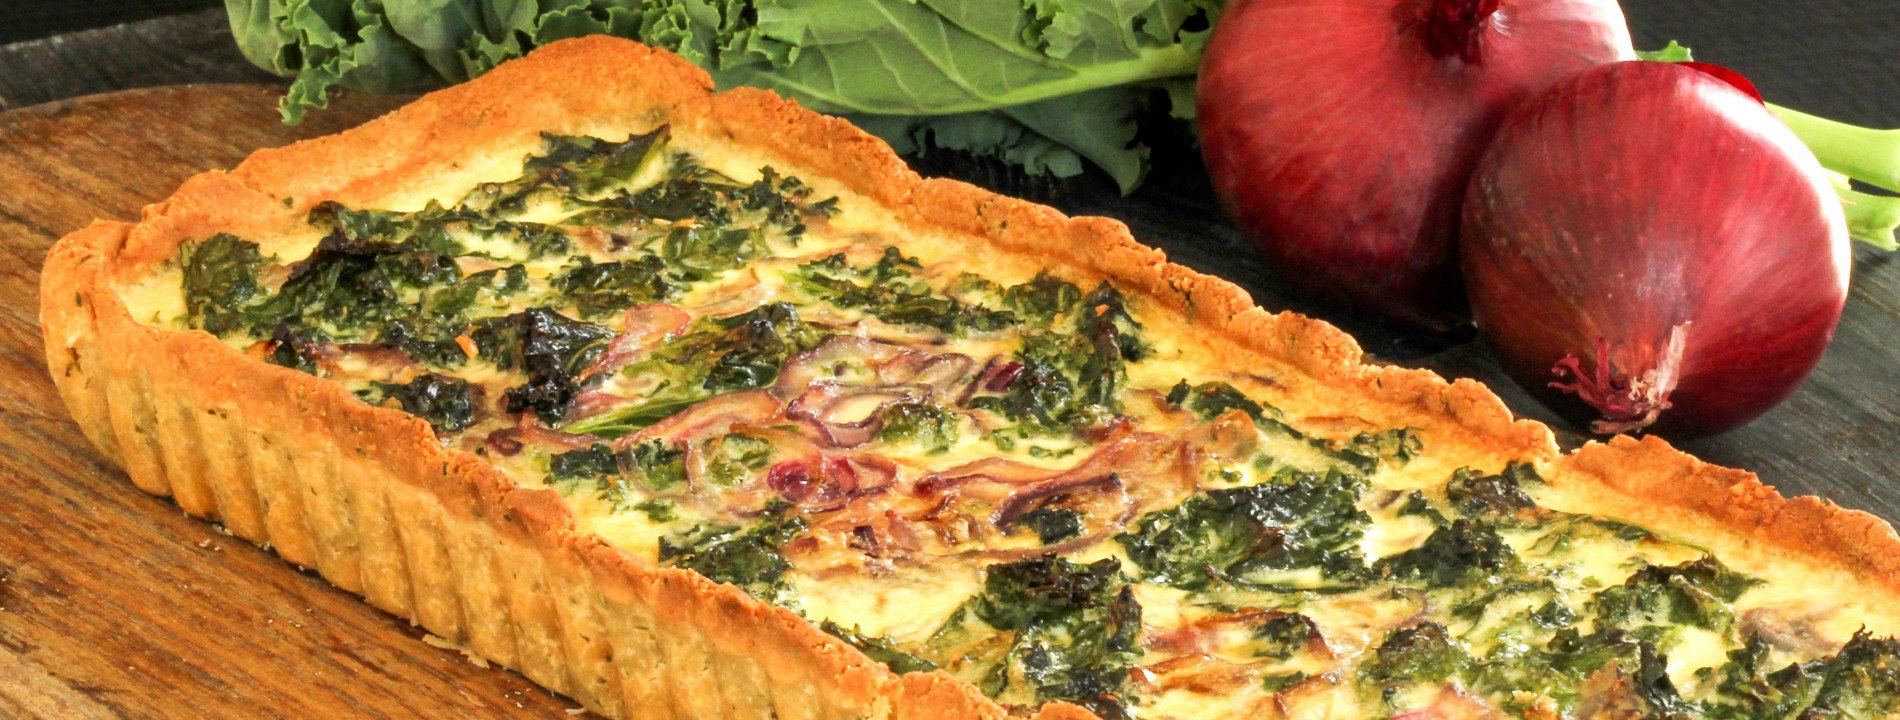 Kale and Red Onion Pie